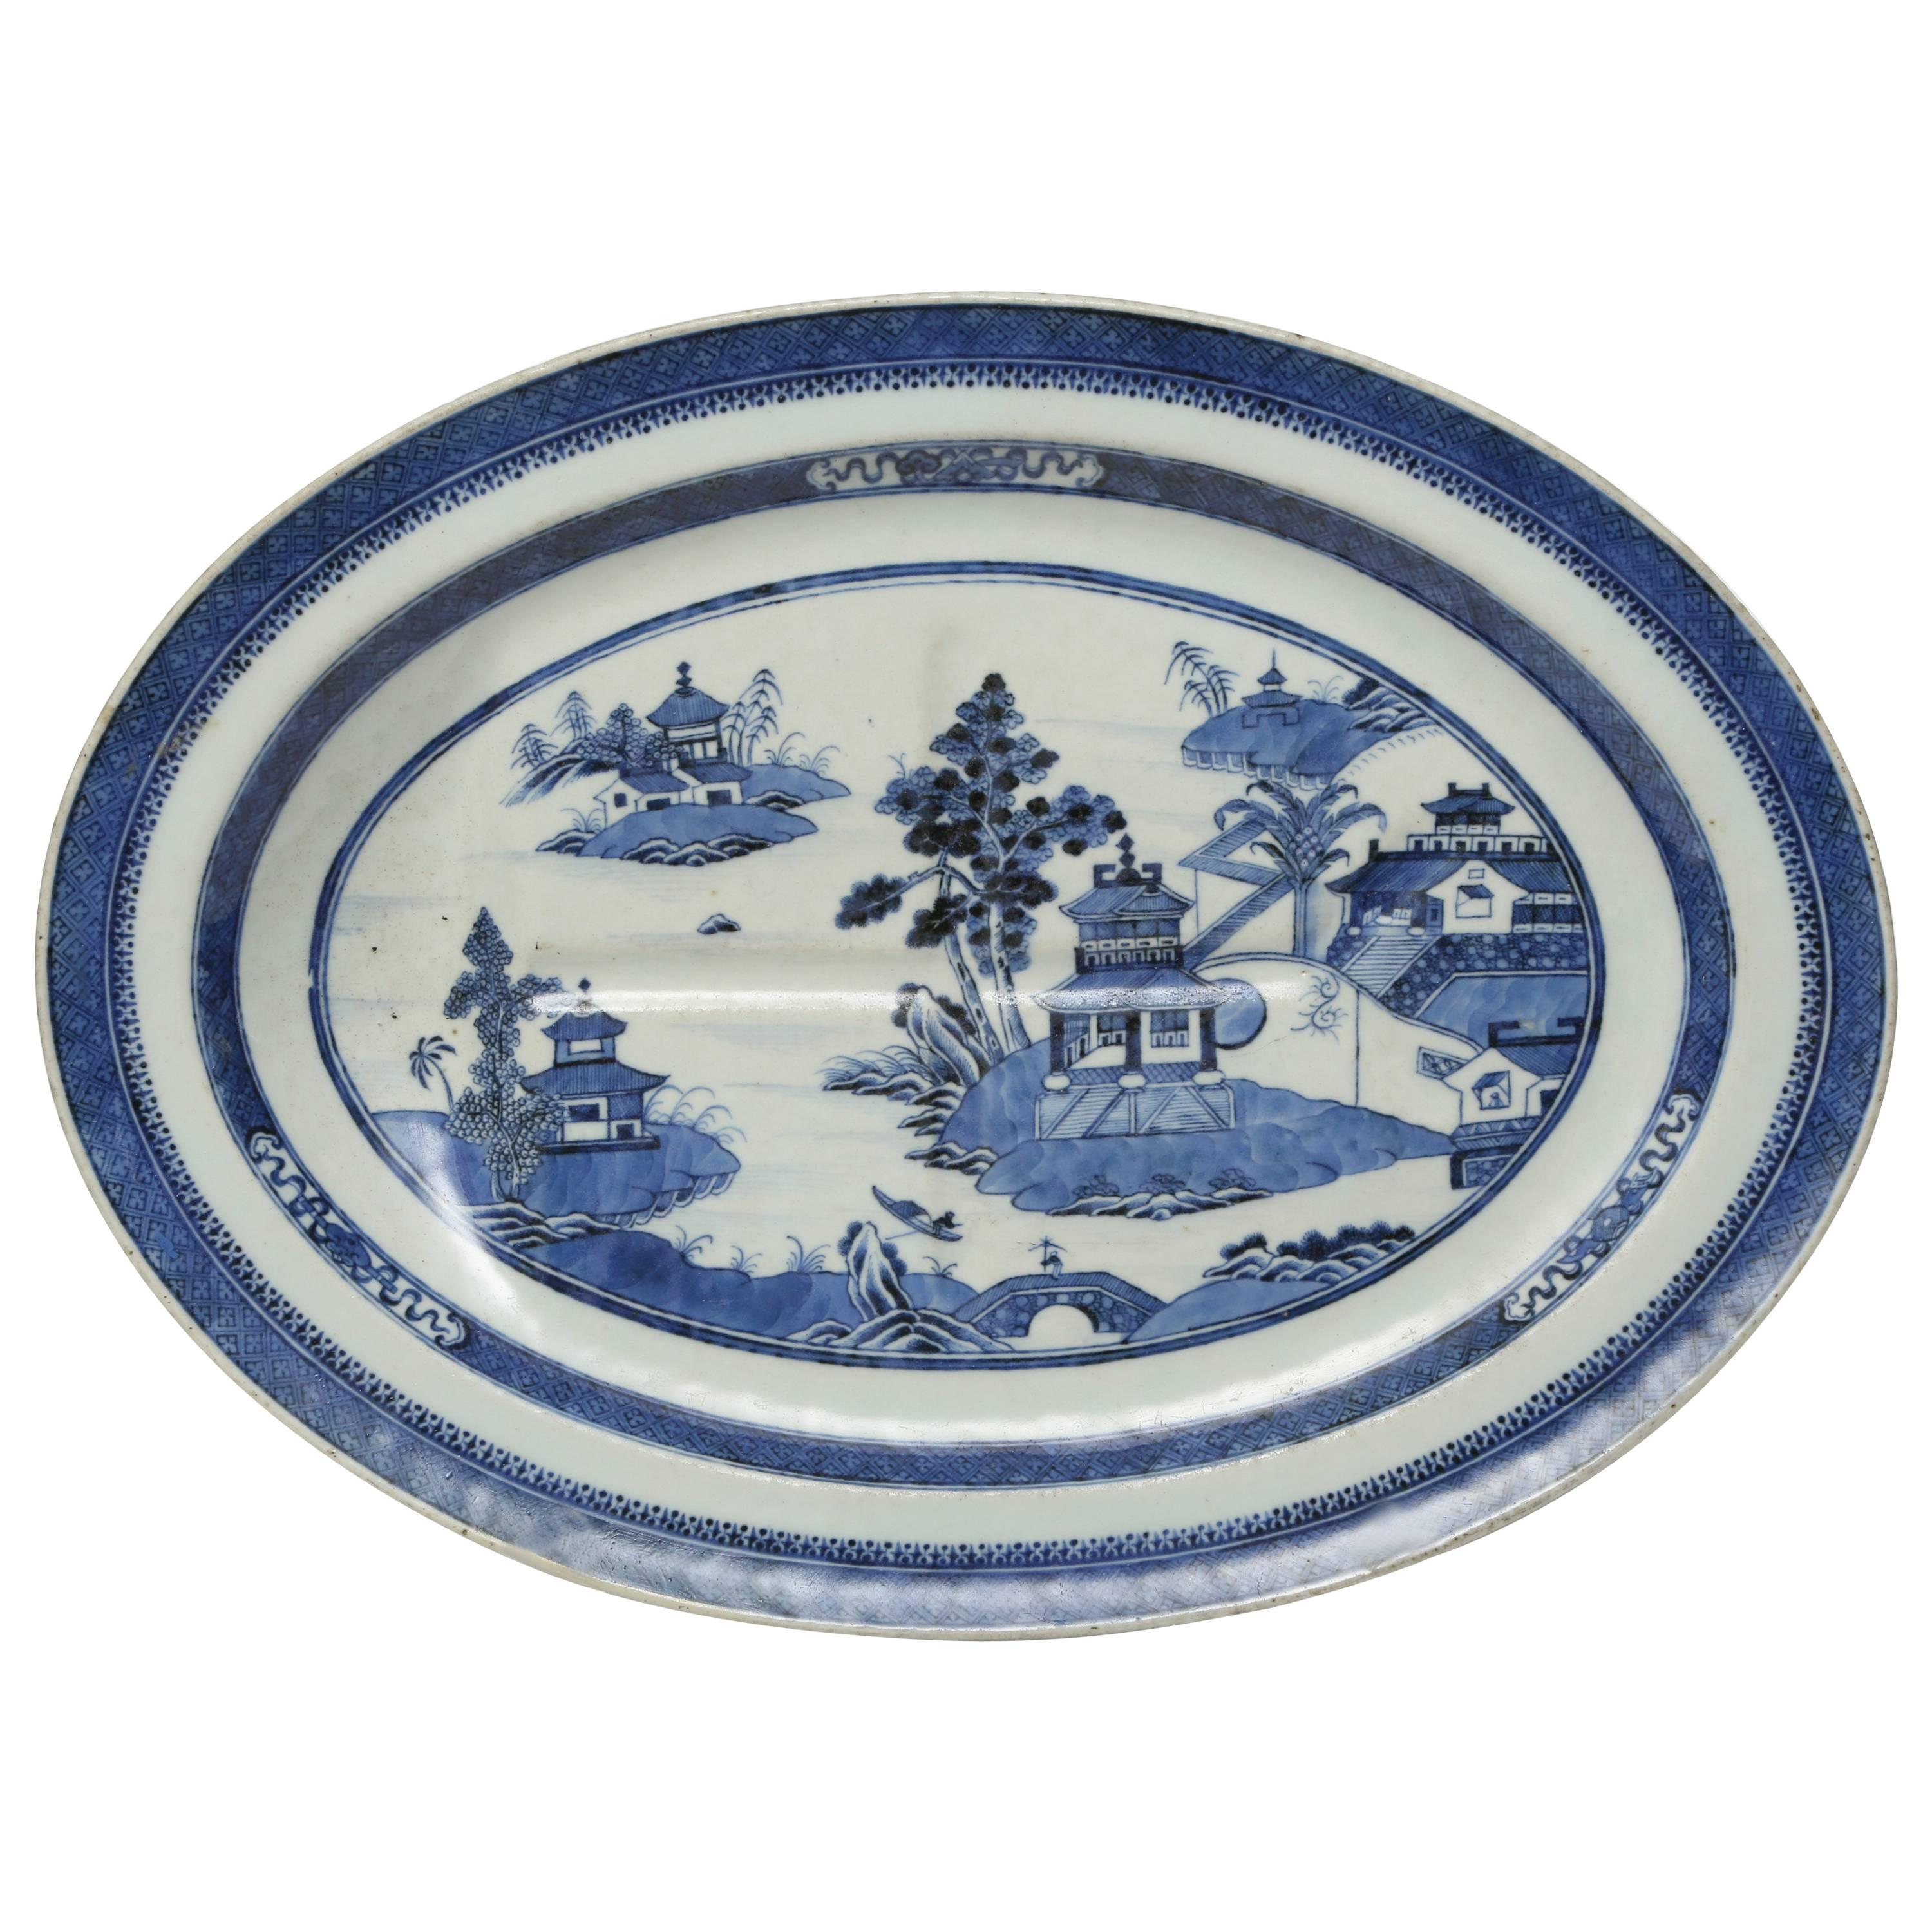 Oval Porcelain Well and Tree Platter, Chinese Export, Nanking Pattern, c. 1790 For Sale